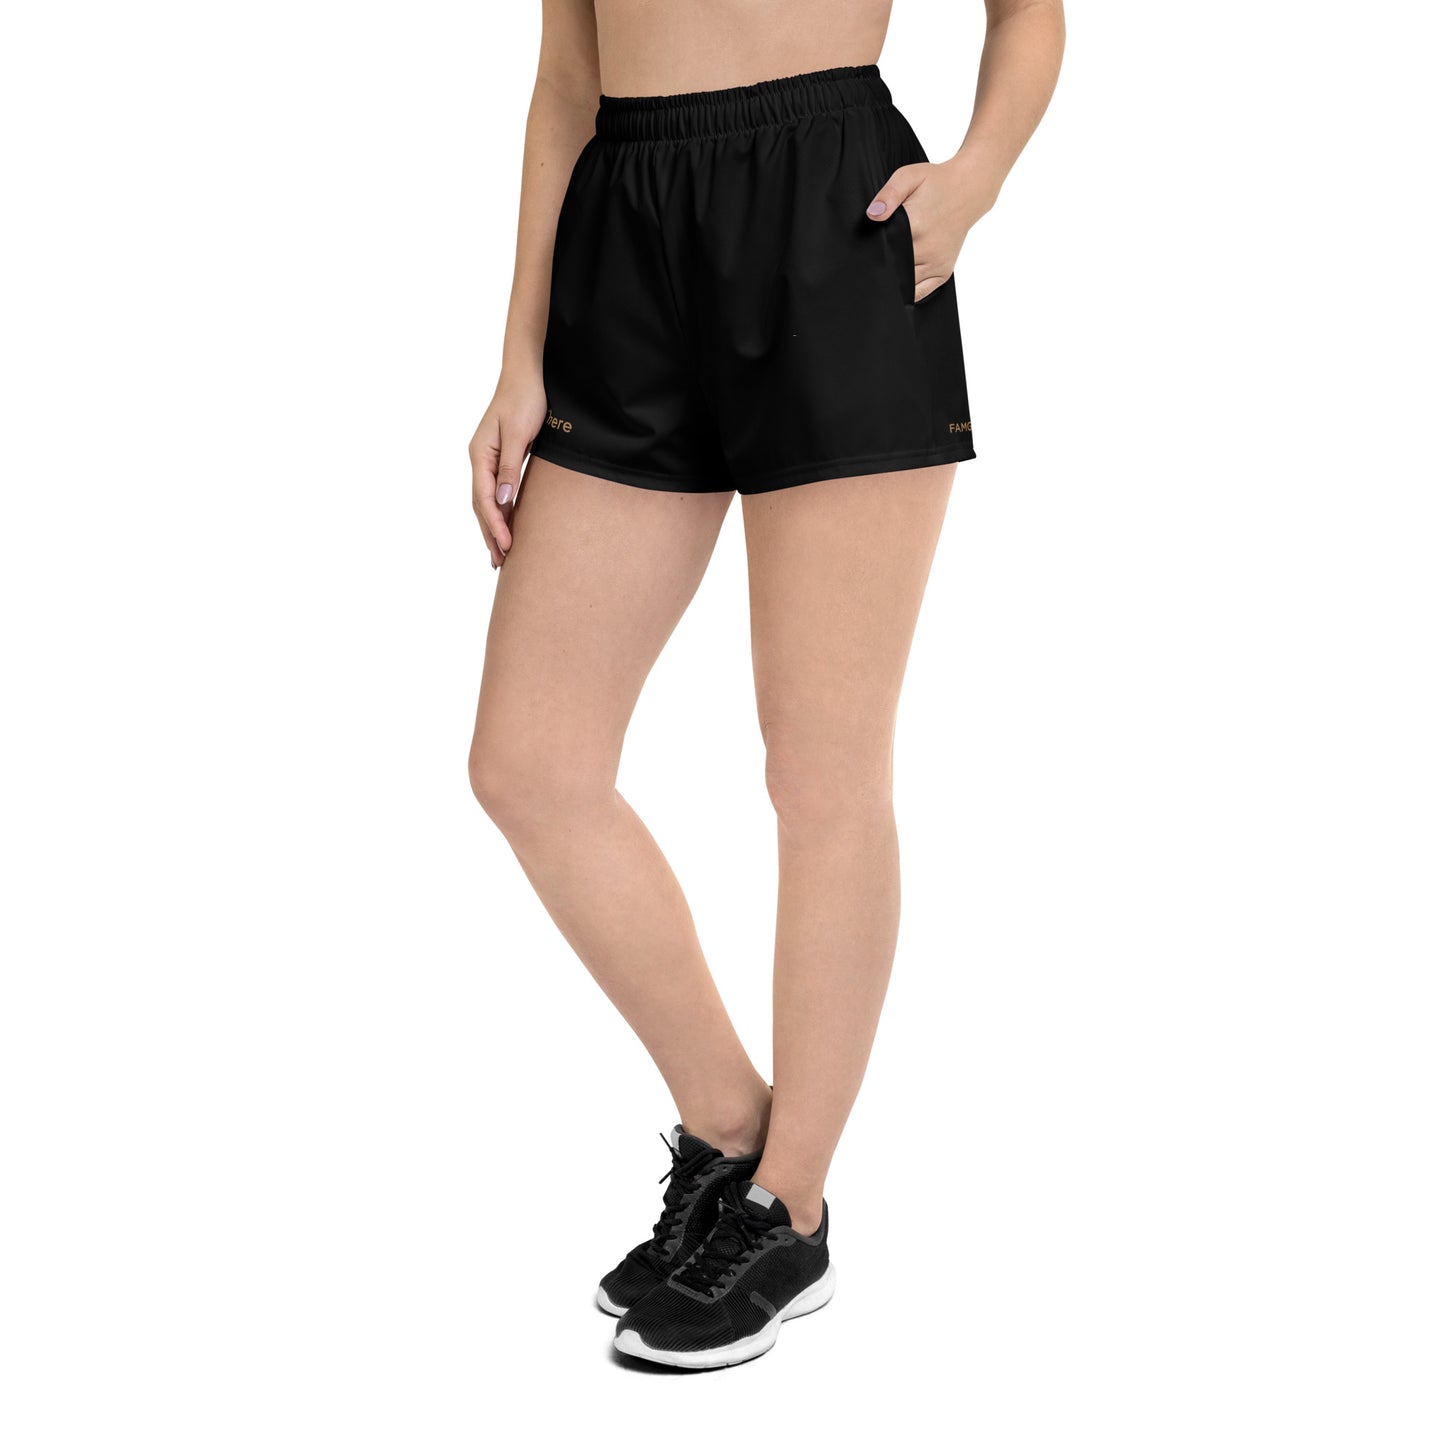 Almost There Women’s Recycled Inspirational Athletic Shorts